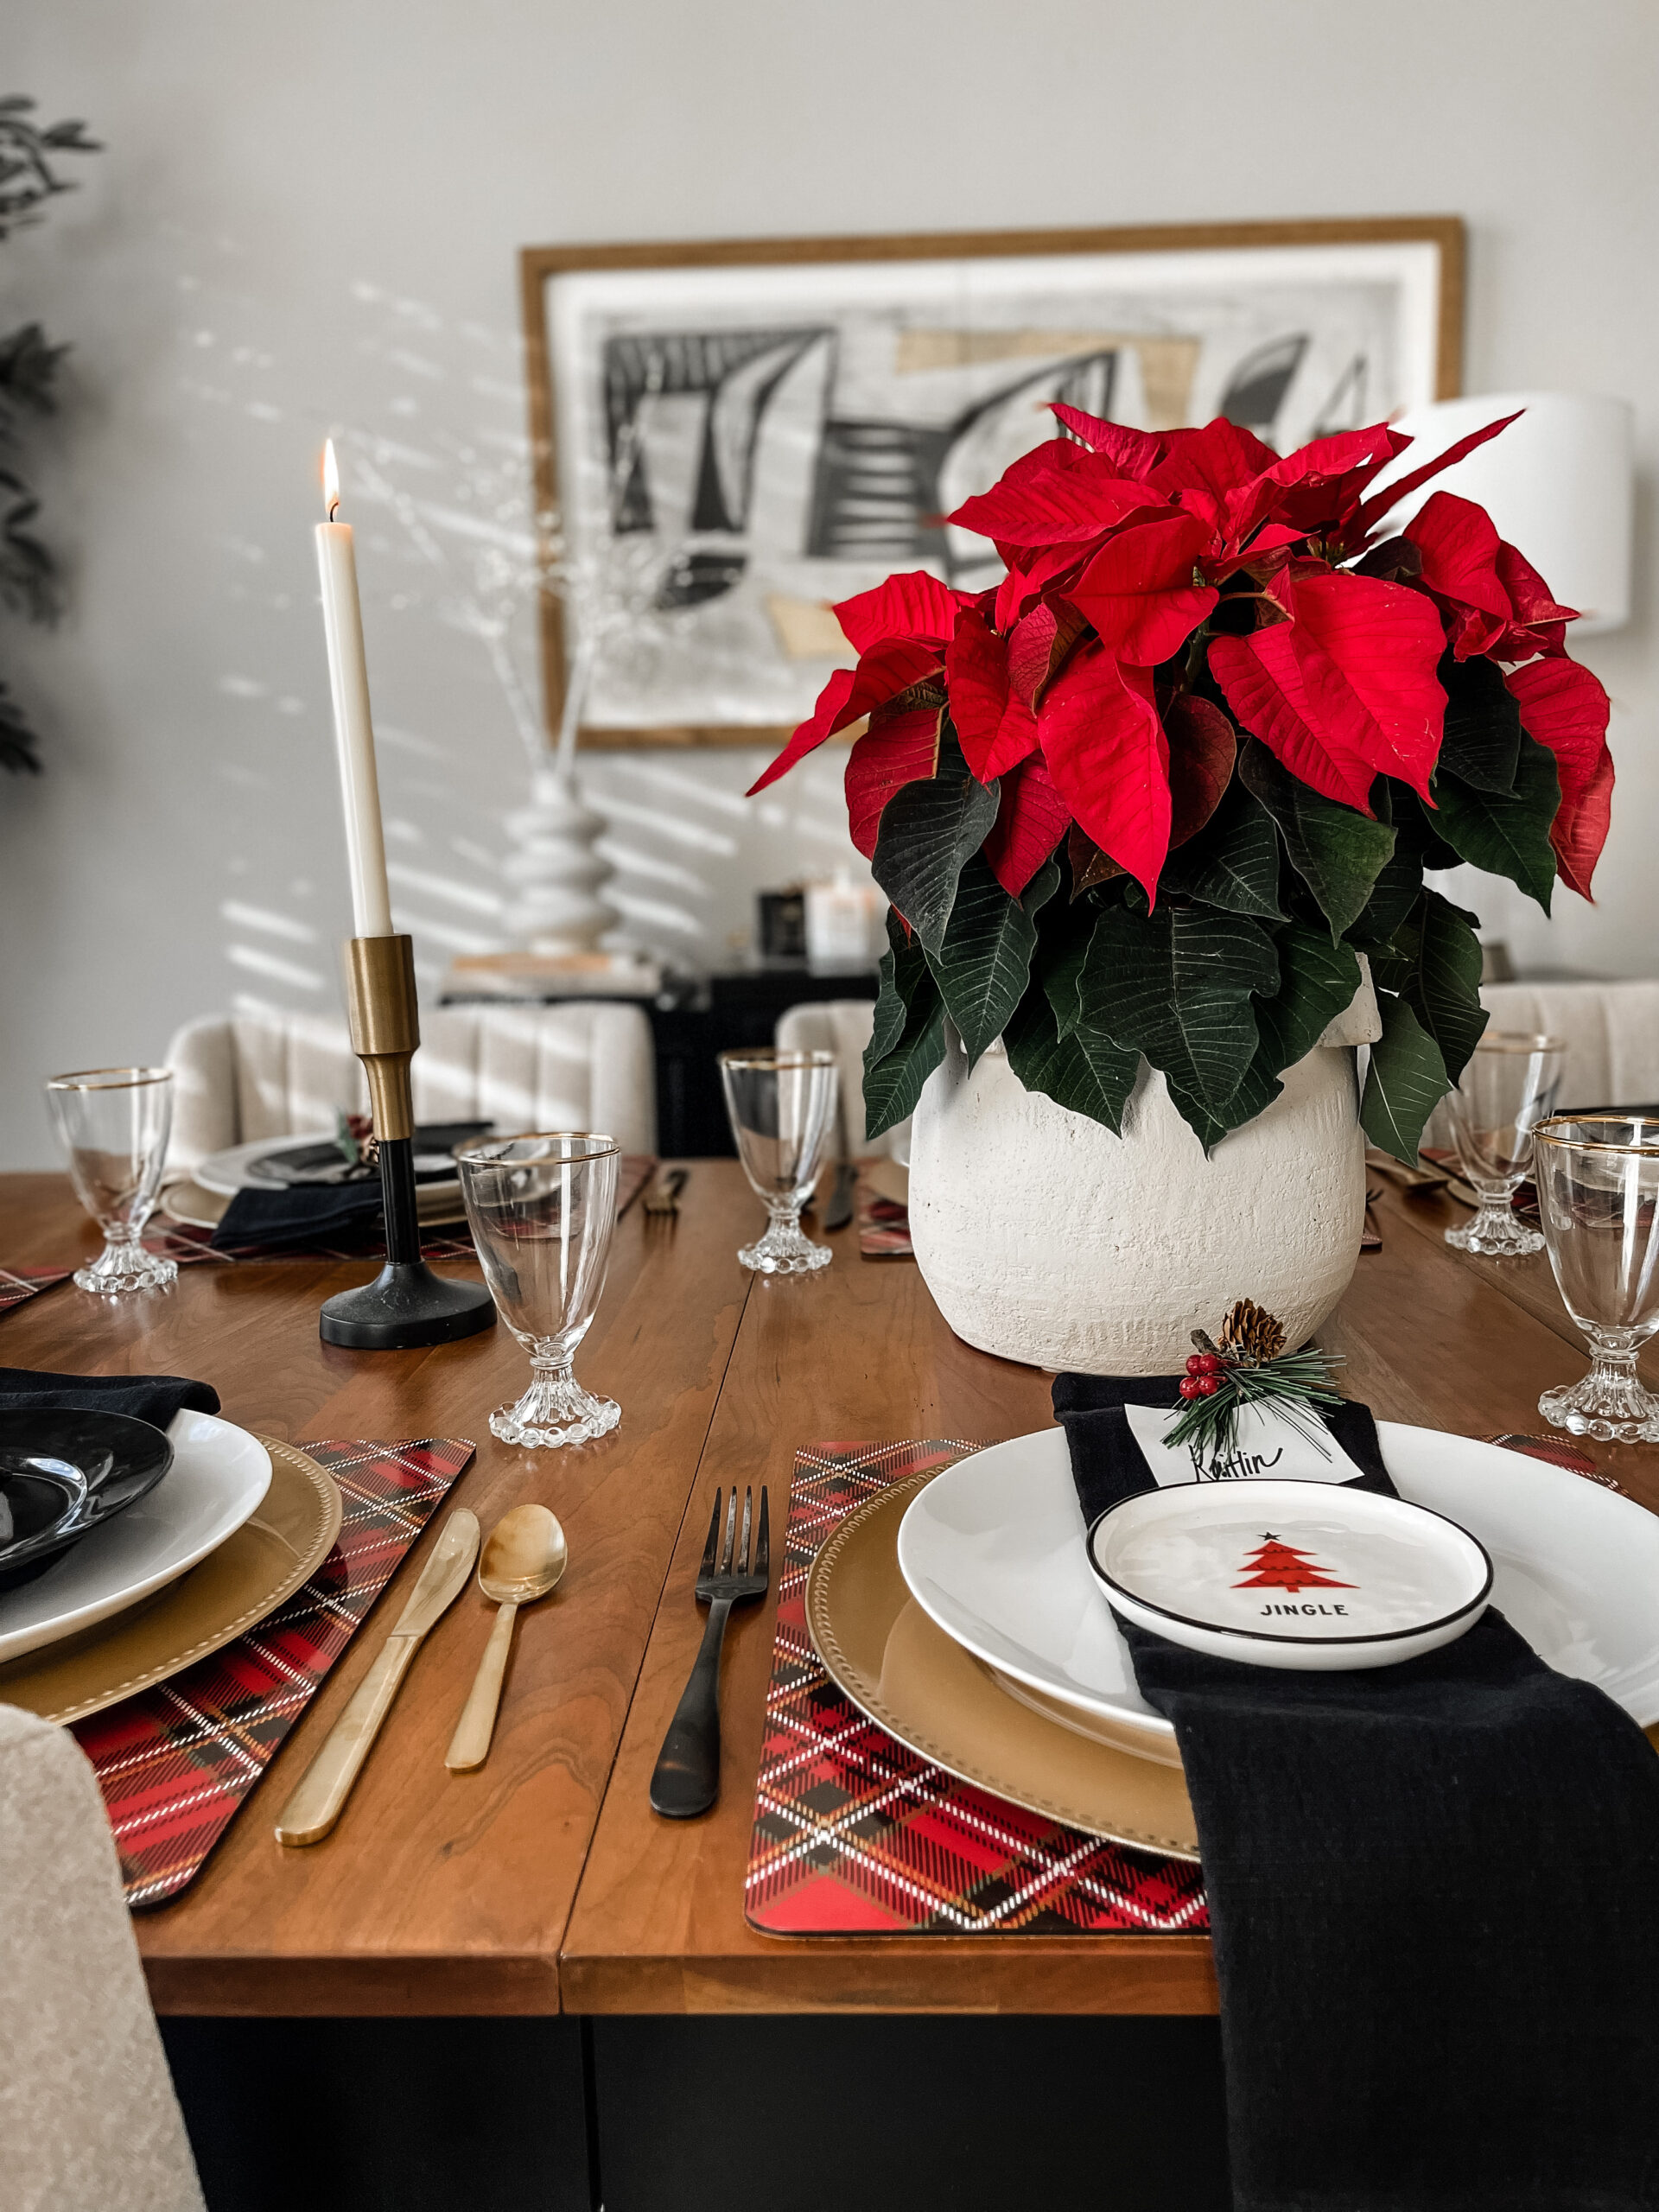 Red in the Dining Room for Christmas - This is our Bliss - Poinsettia & plaid Christmas table